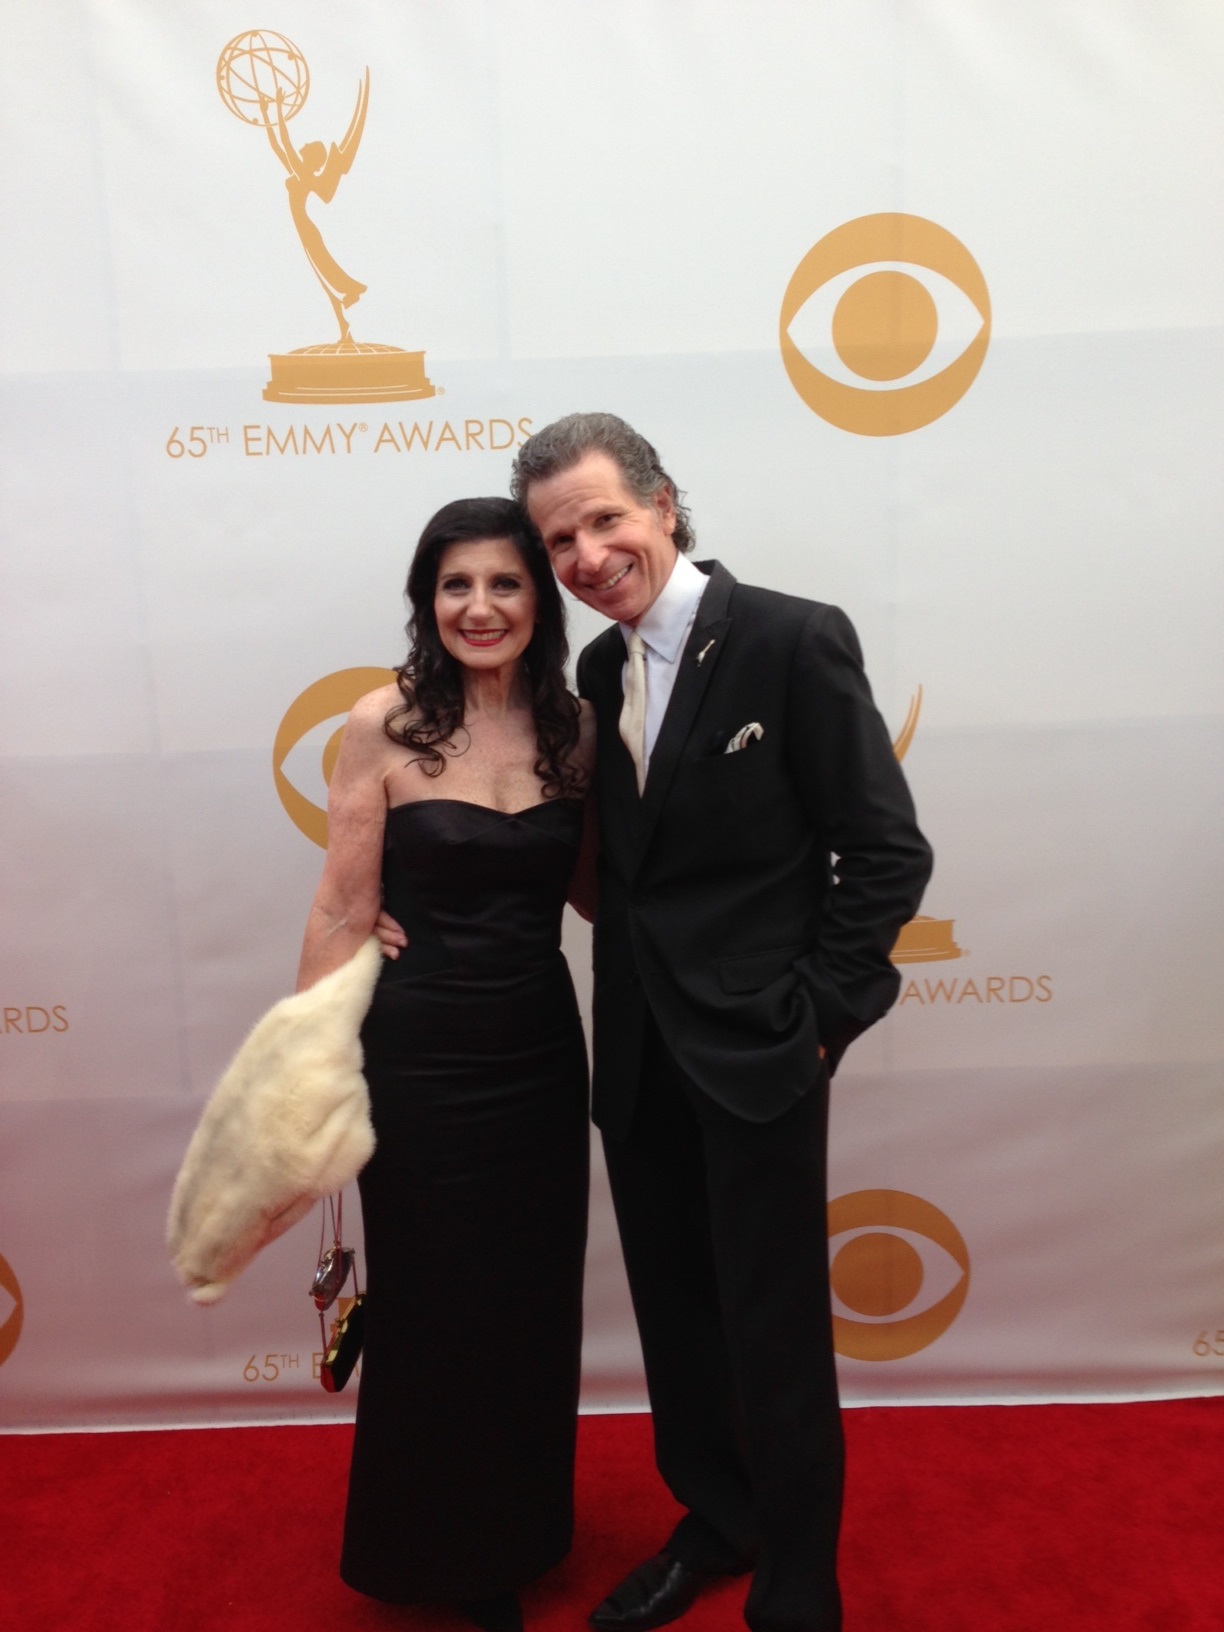 Richard Warren Rappaport and Hello Hollywood's Rene' Katz at the 2013 Primetime Emmy Awards, Los Angeles.